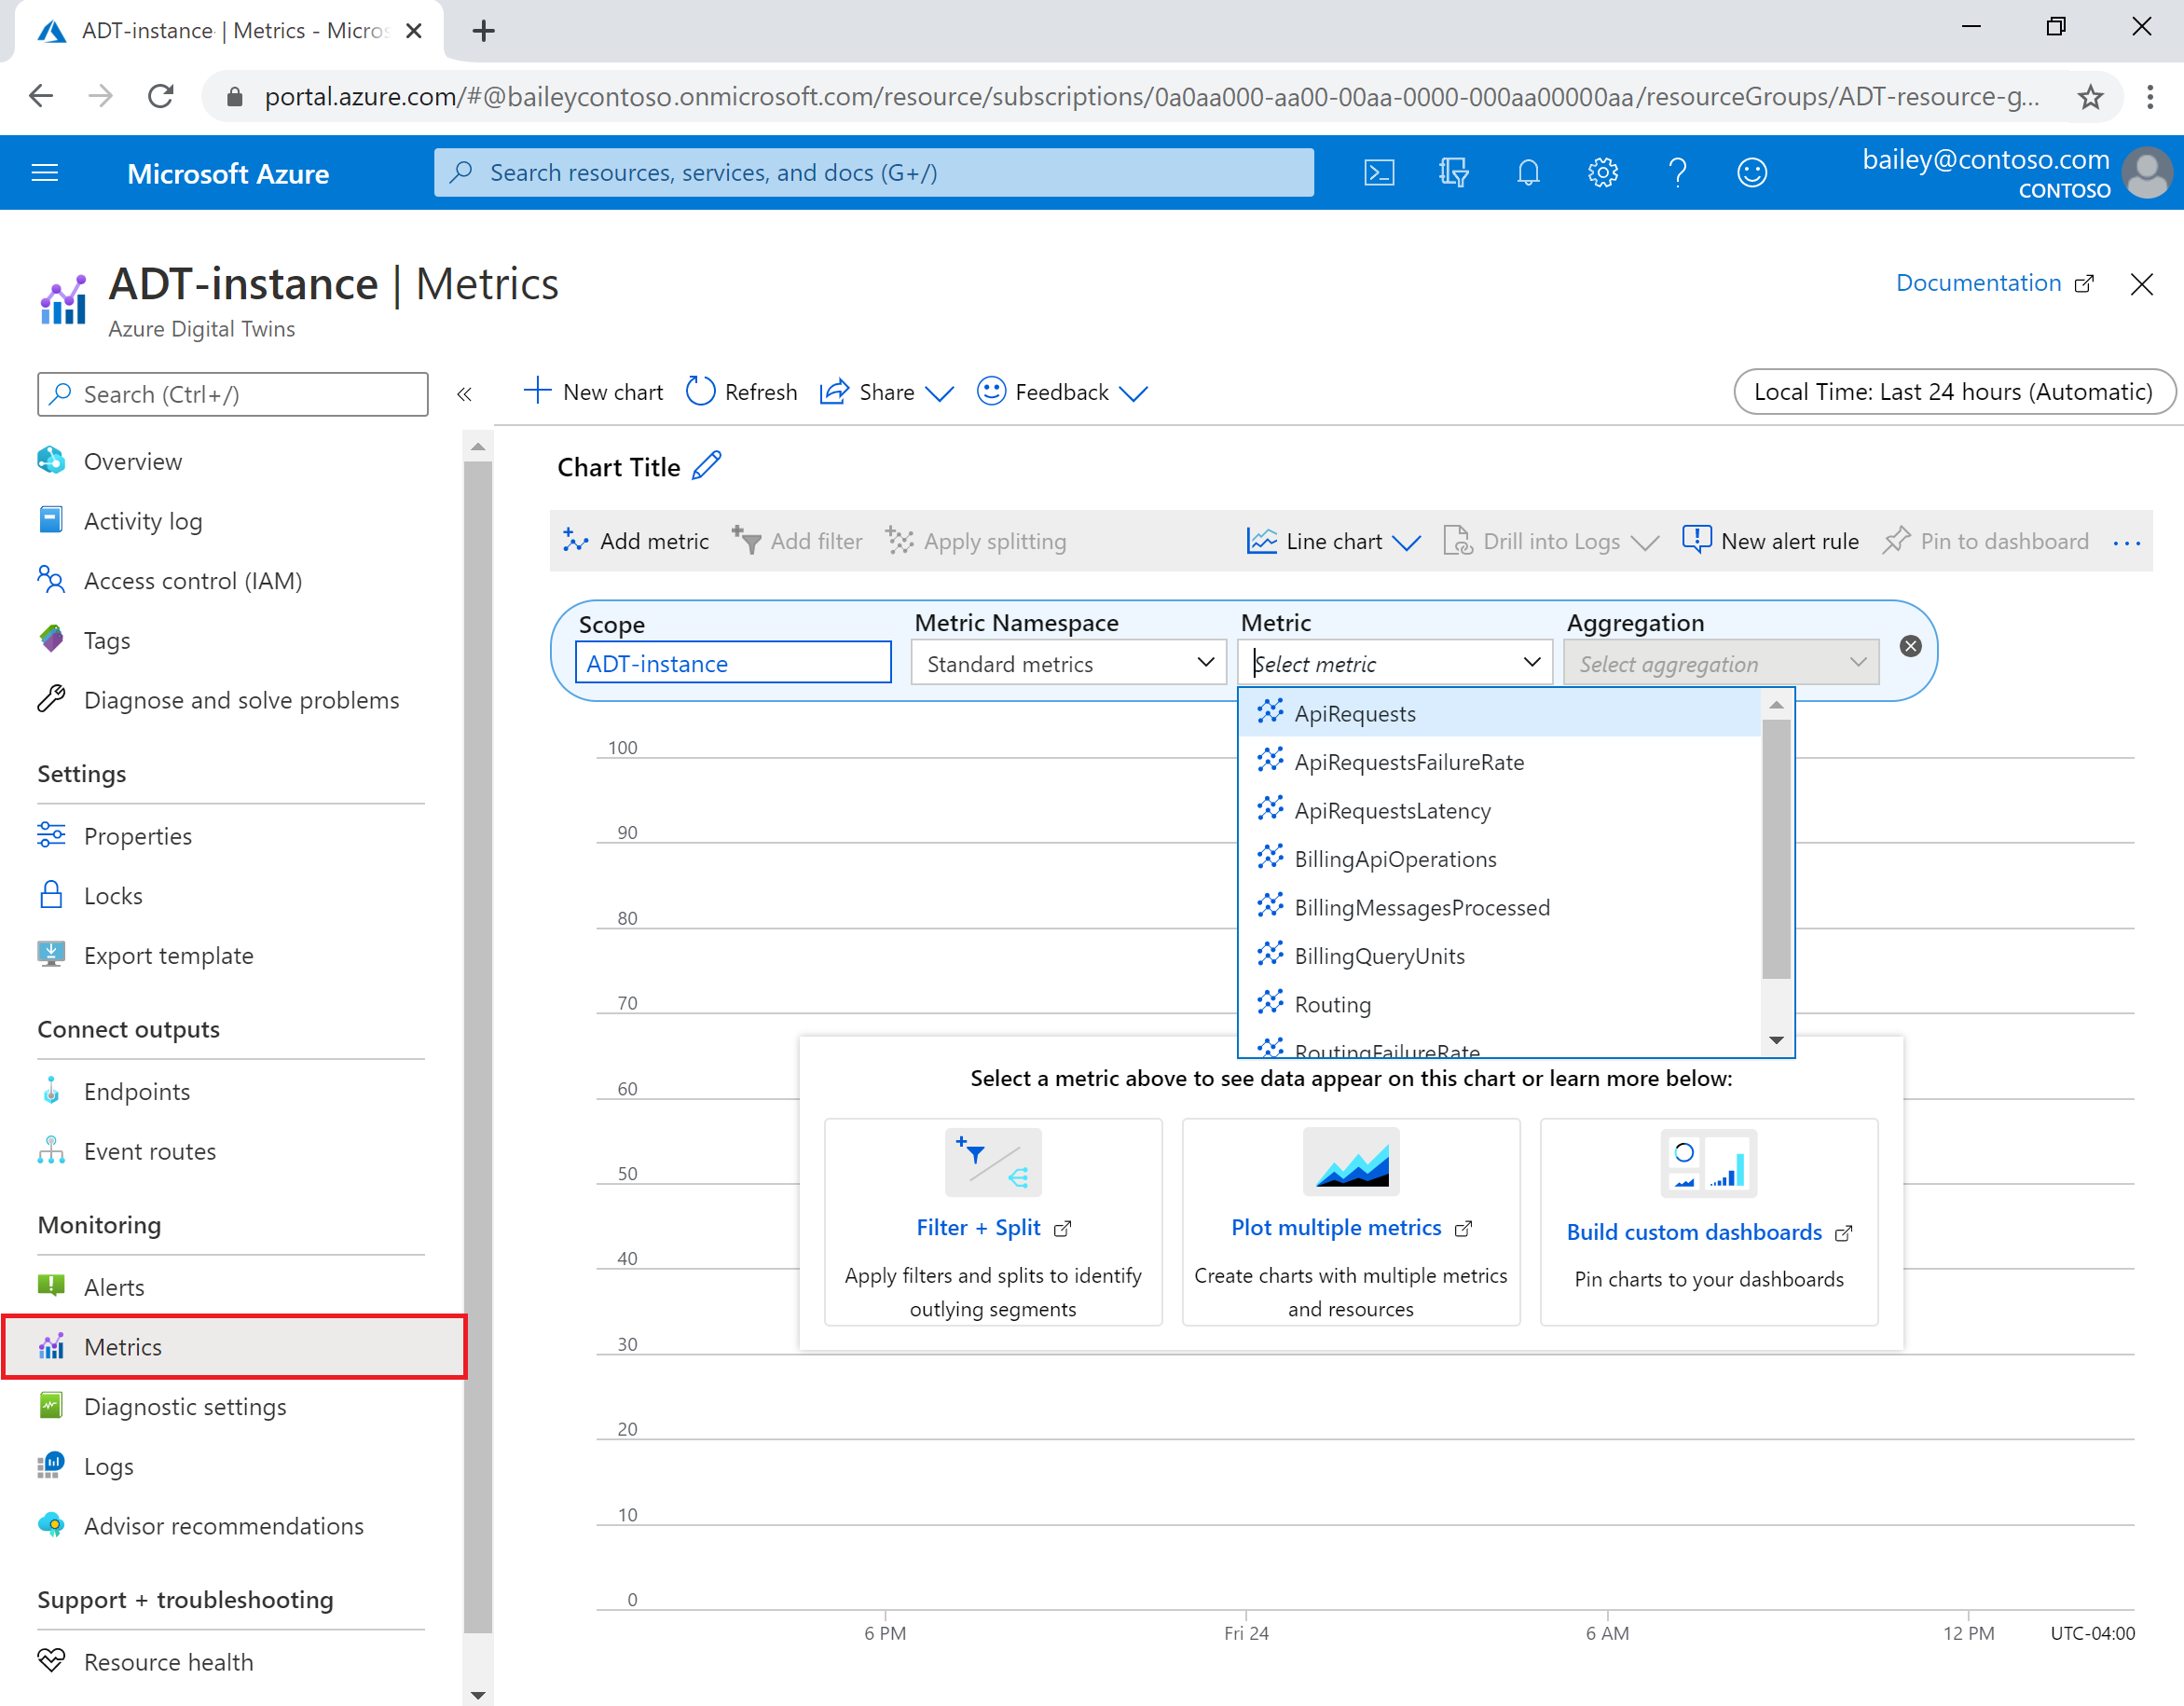 Screenshot showing the metrics page for Azure Digital Twins in the Azure portal.